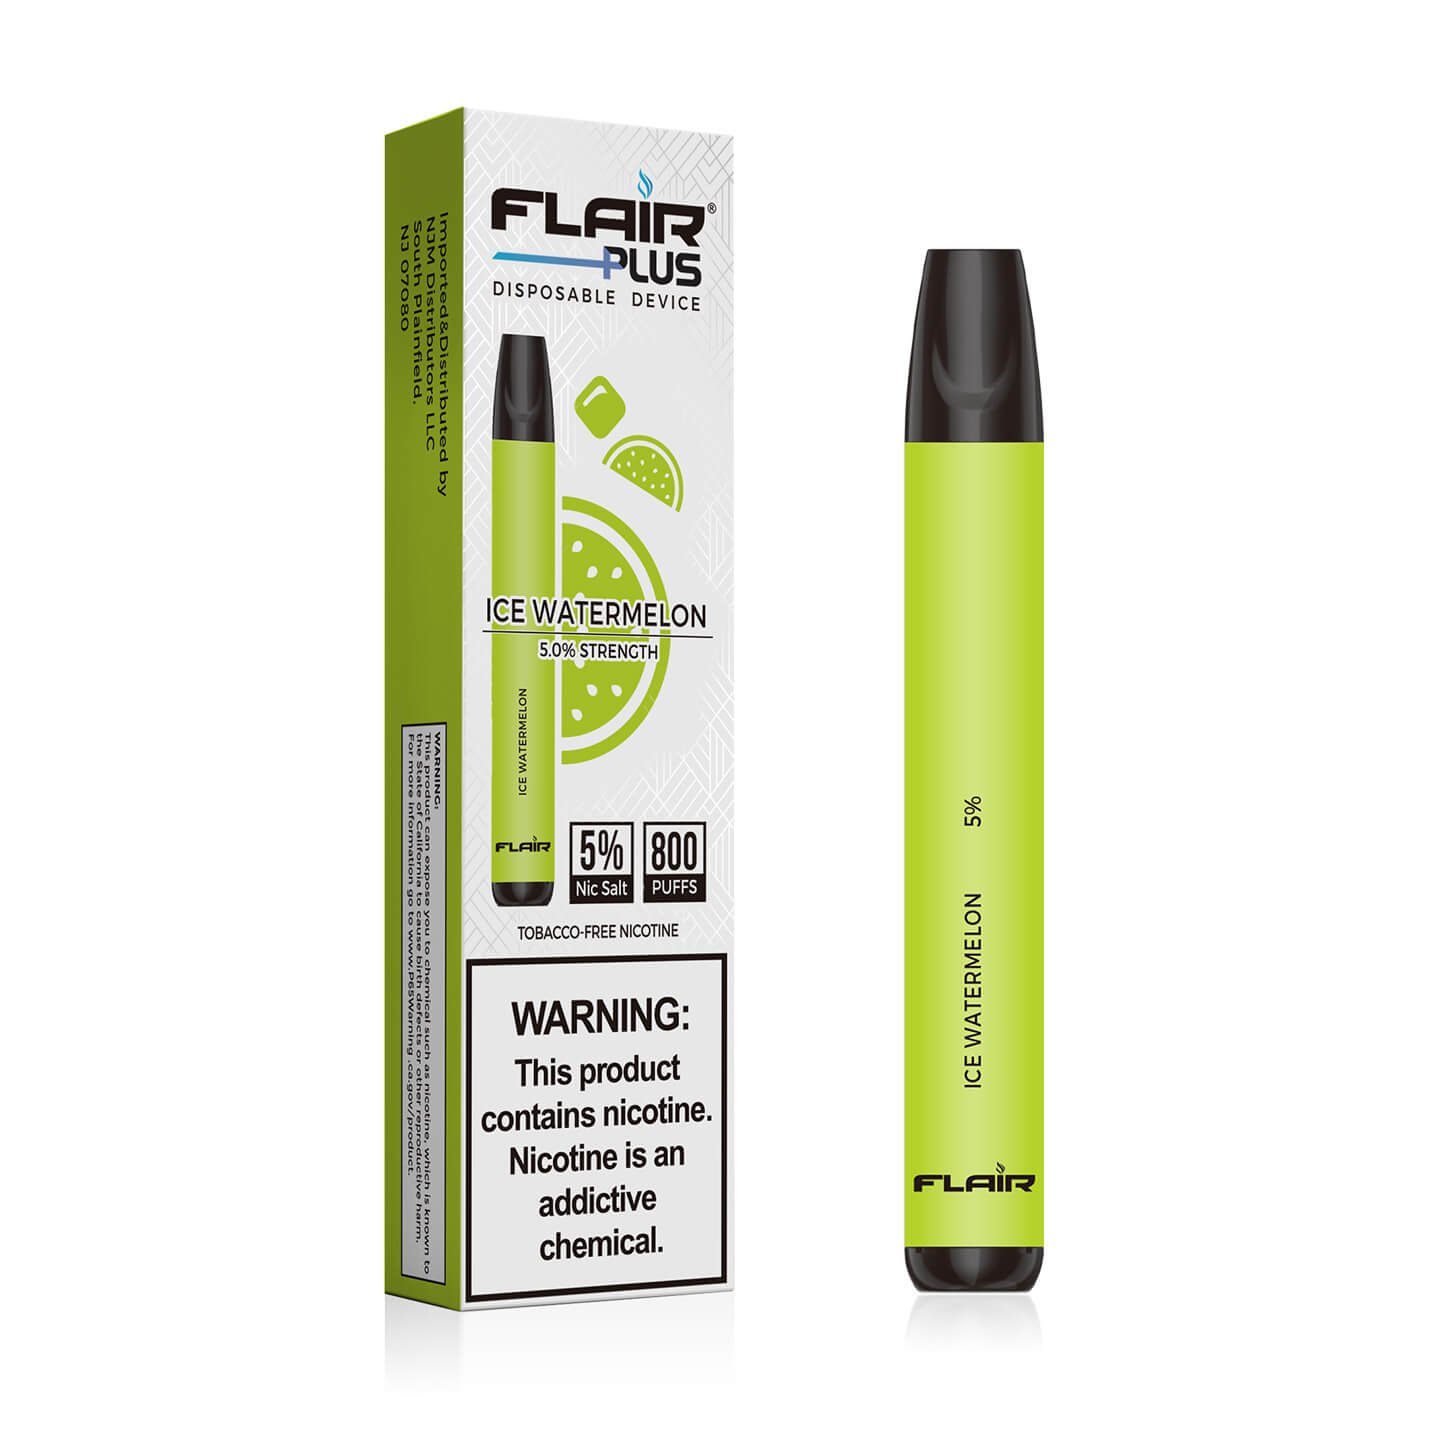 Flair Plus Disposable Devices (Ice Watermelon - 800 Puffs)